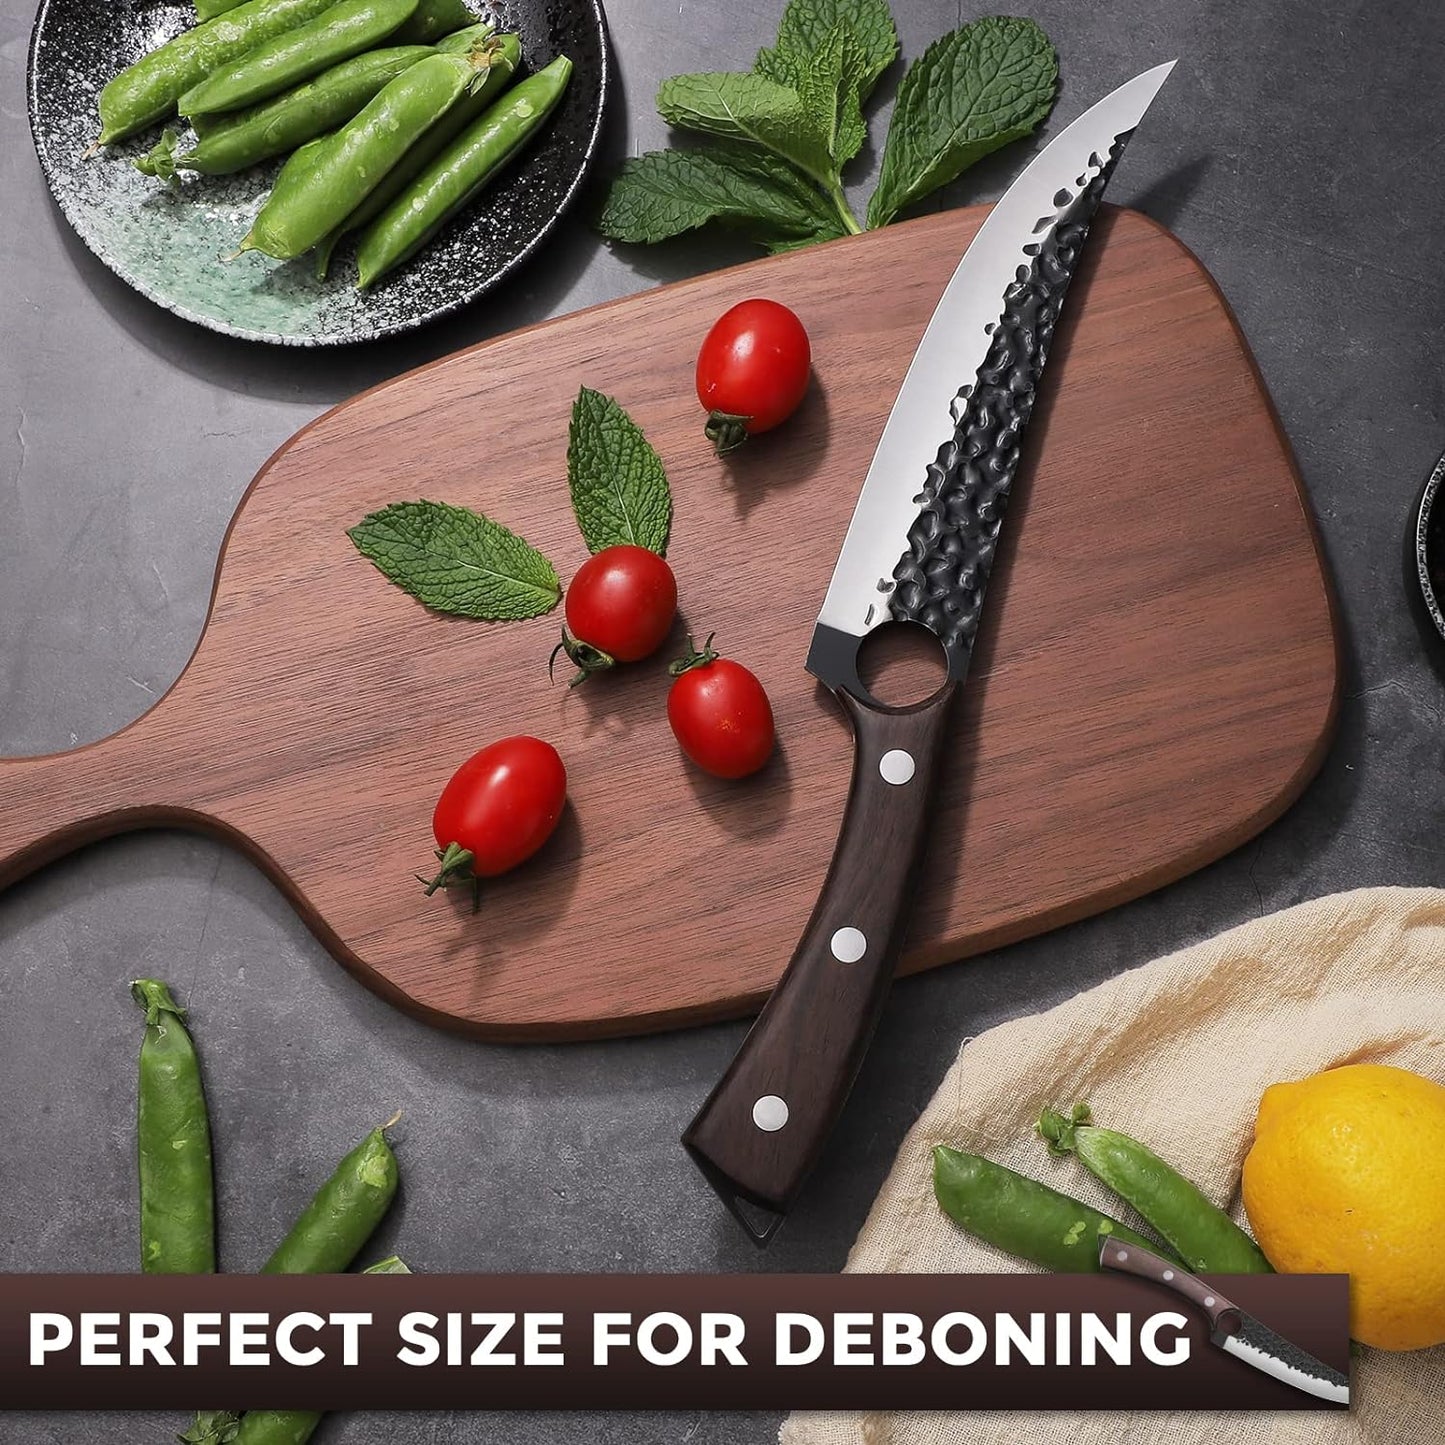 KD Hand Forged Boning Knife Kitchen Chef Knife with Gift Box